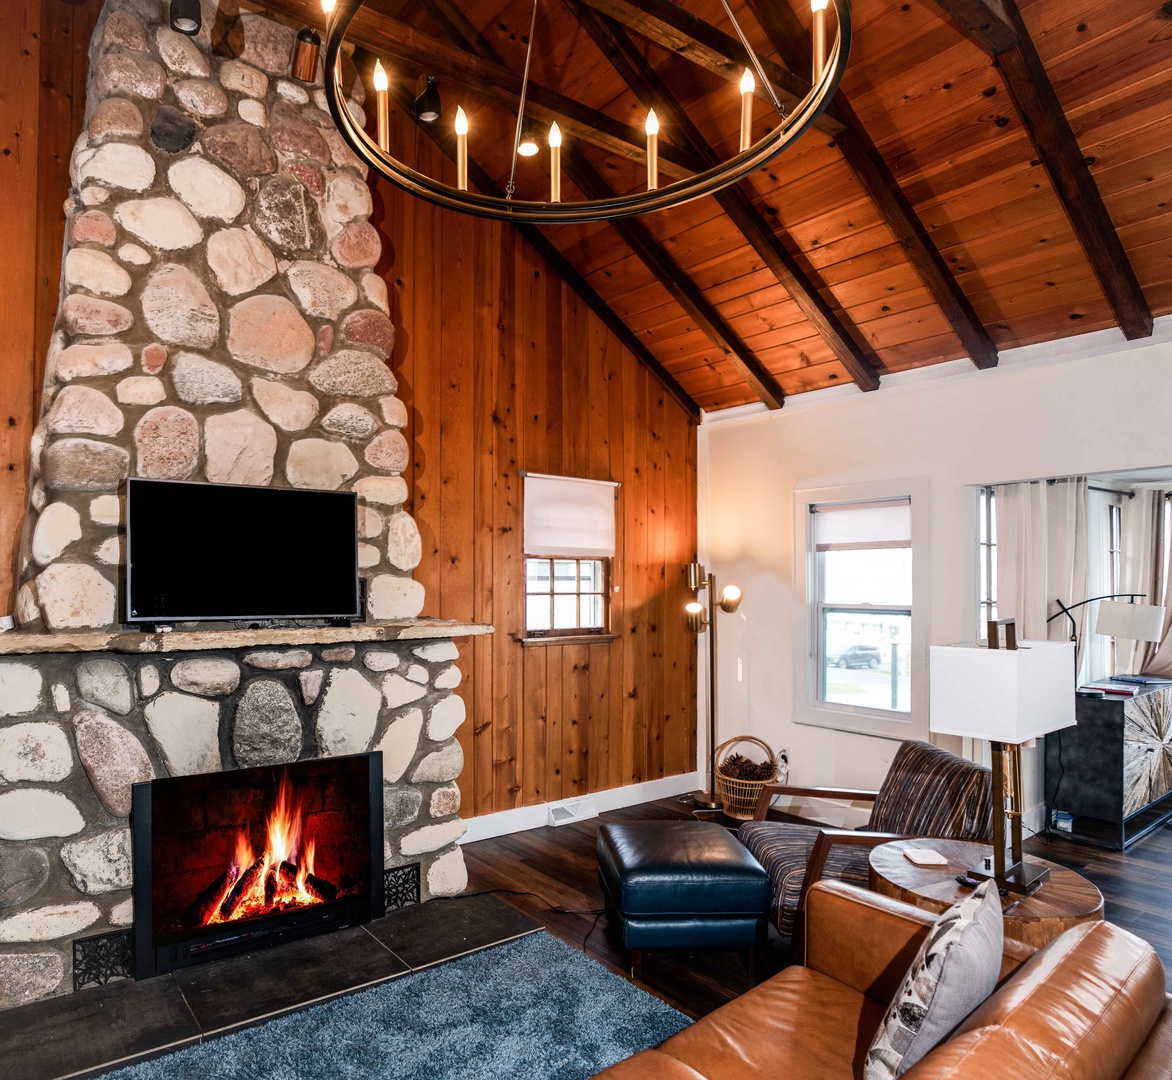 Embrace the quaint, rustic allure and fantastic amenities that Como Cabin has to offer